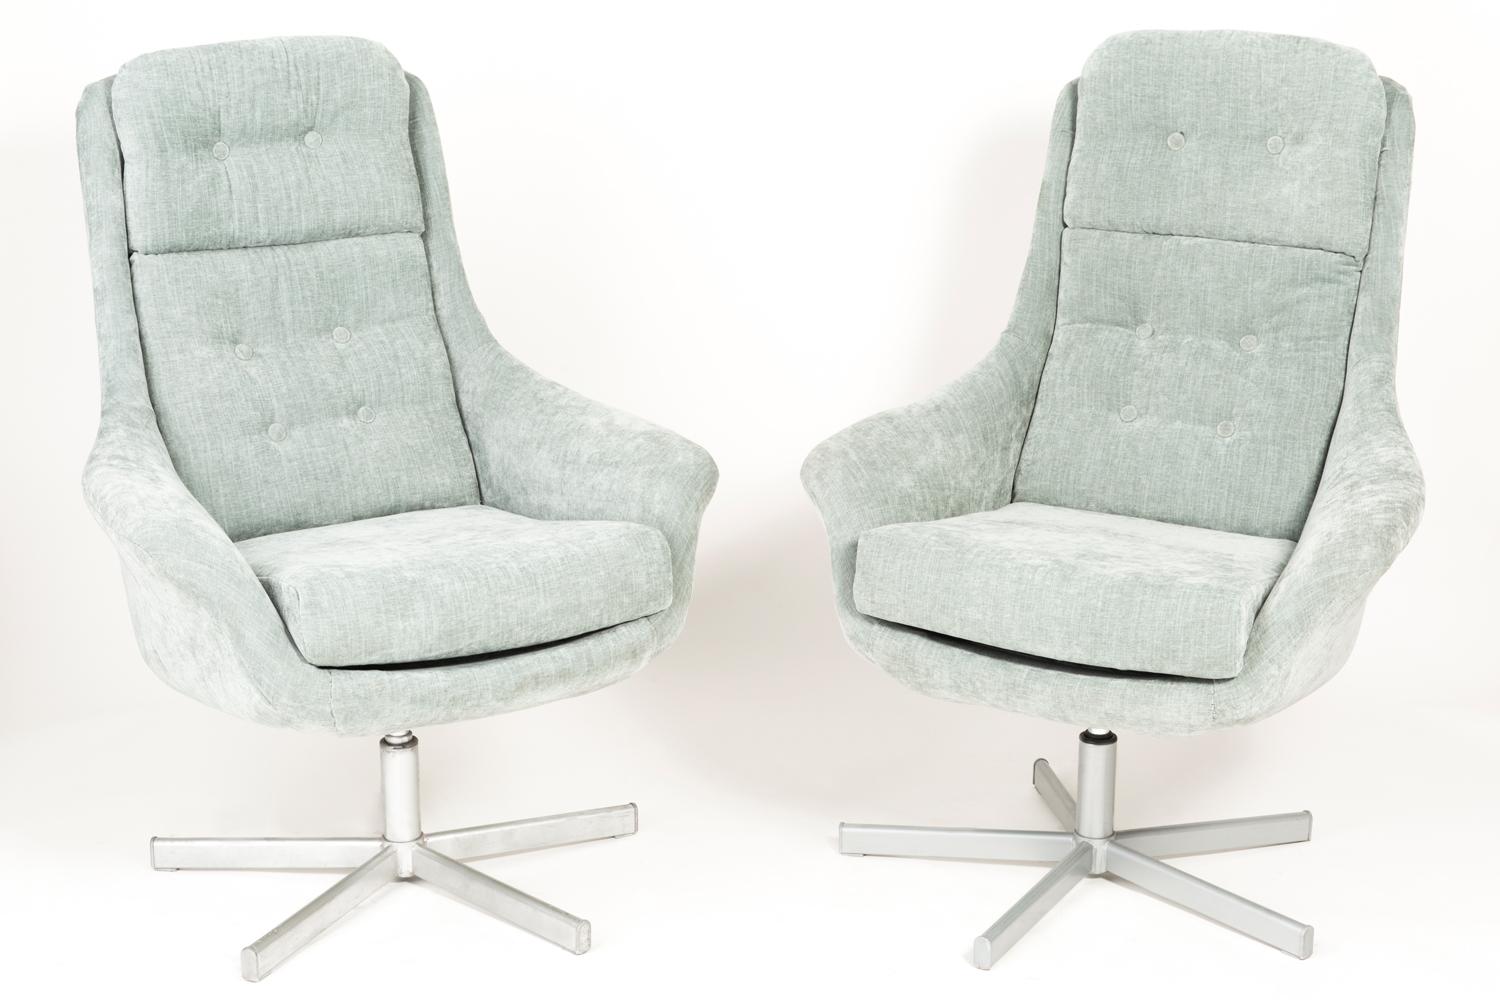 Set of two swivel armchairs from the 1970s, produced in the Silesian furniture factory in Swiebodzin - at the moment they are unique. Due to their dimensions, they perfectly blend in even in small apartments providing comfort and beautiful